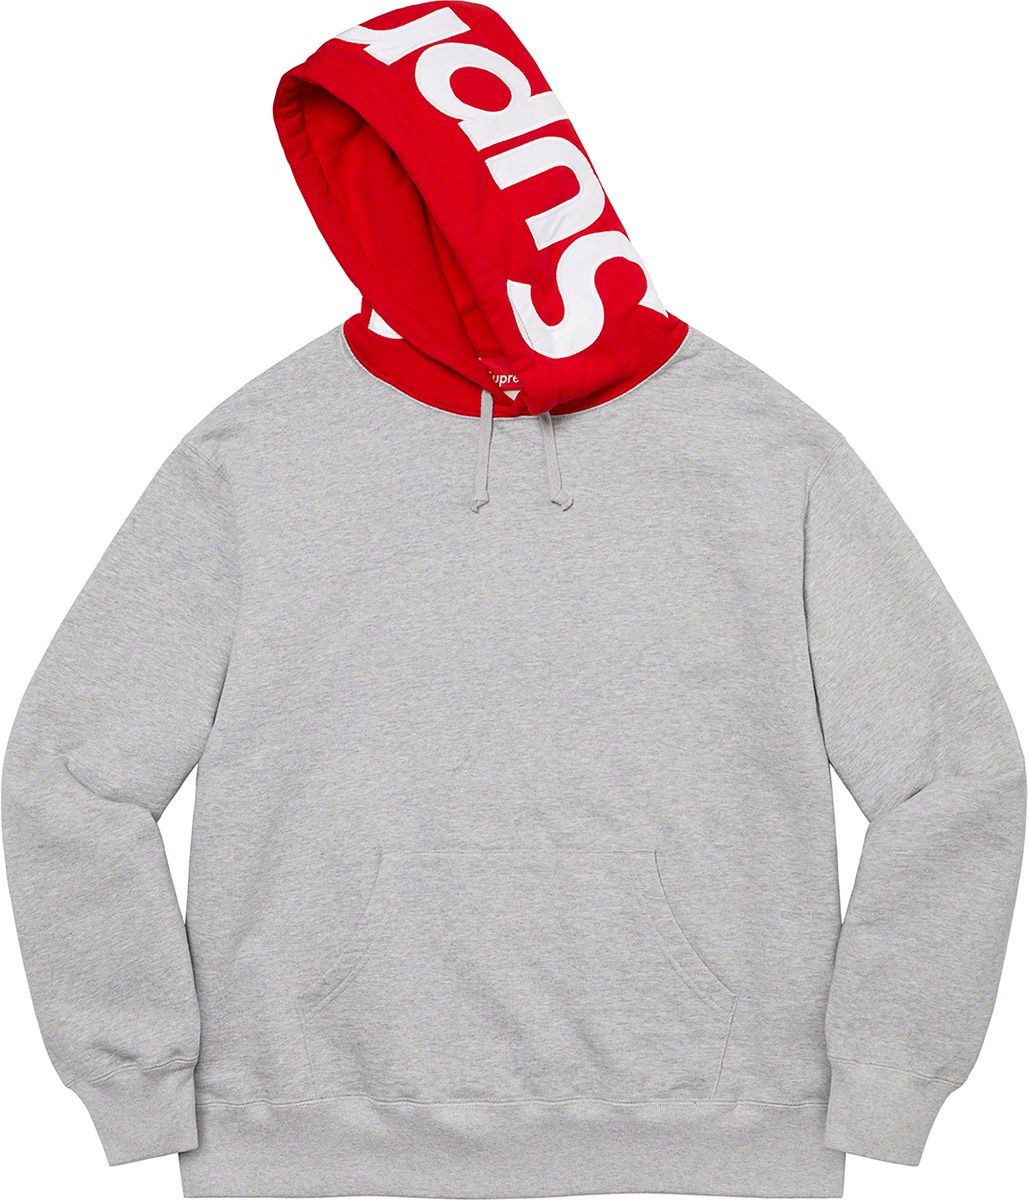 Contrast Hooded Sweatshirt - Fall/Winter 2021 Preview – Supreme